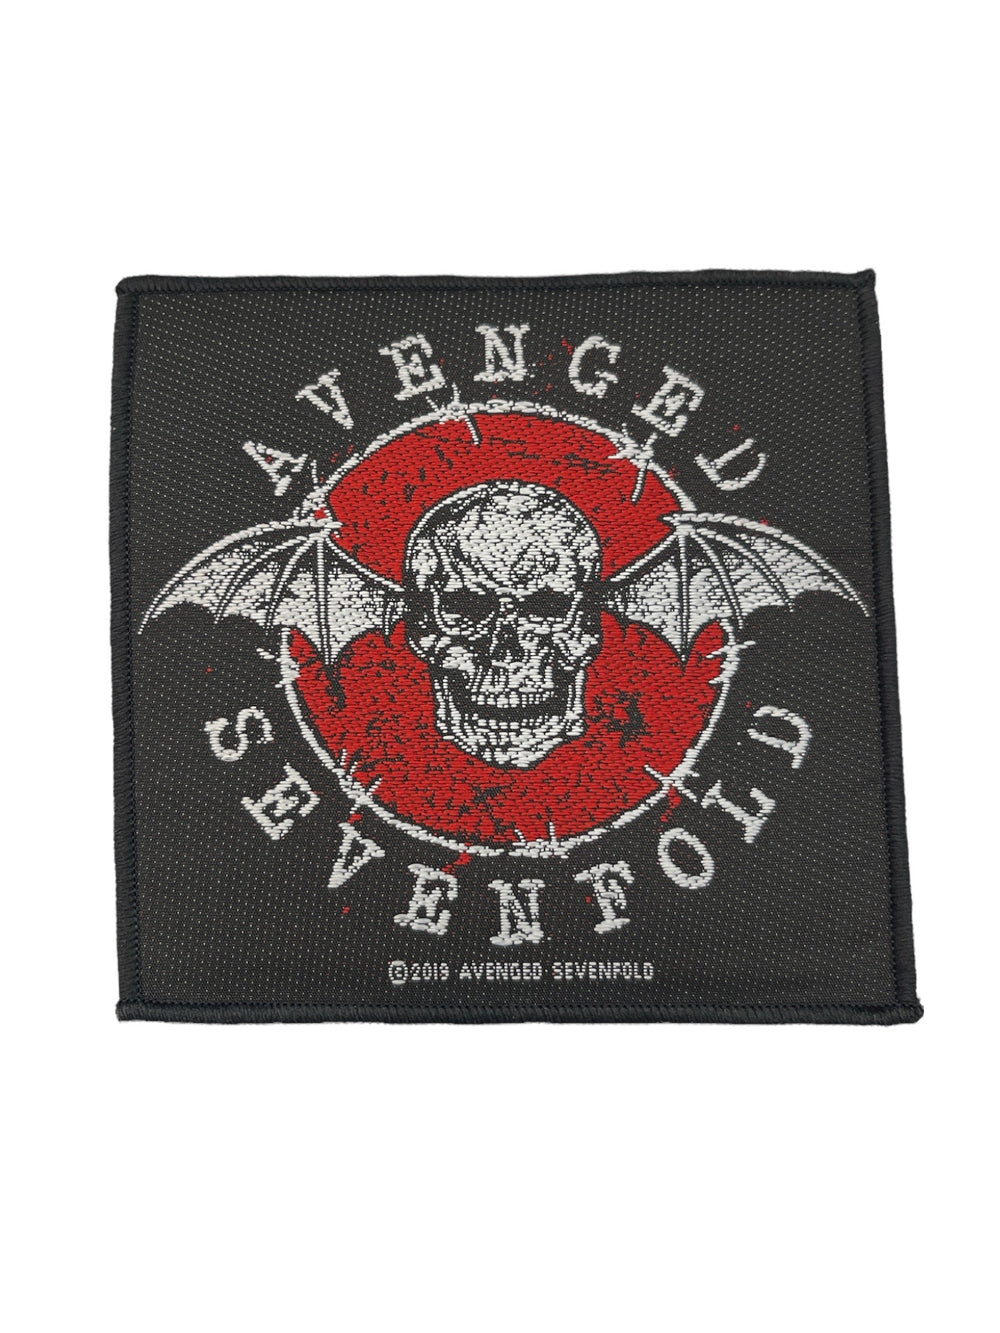 Avenged Sevenfold Standard Patch: Distressed Skull  Official Woven Patch Brand New